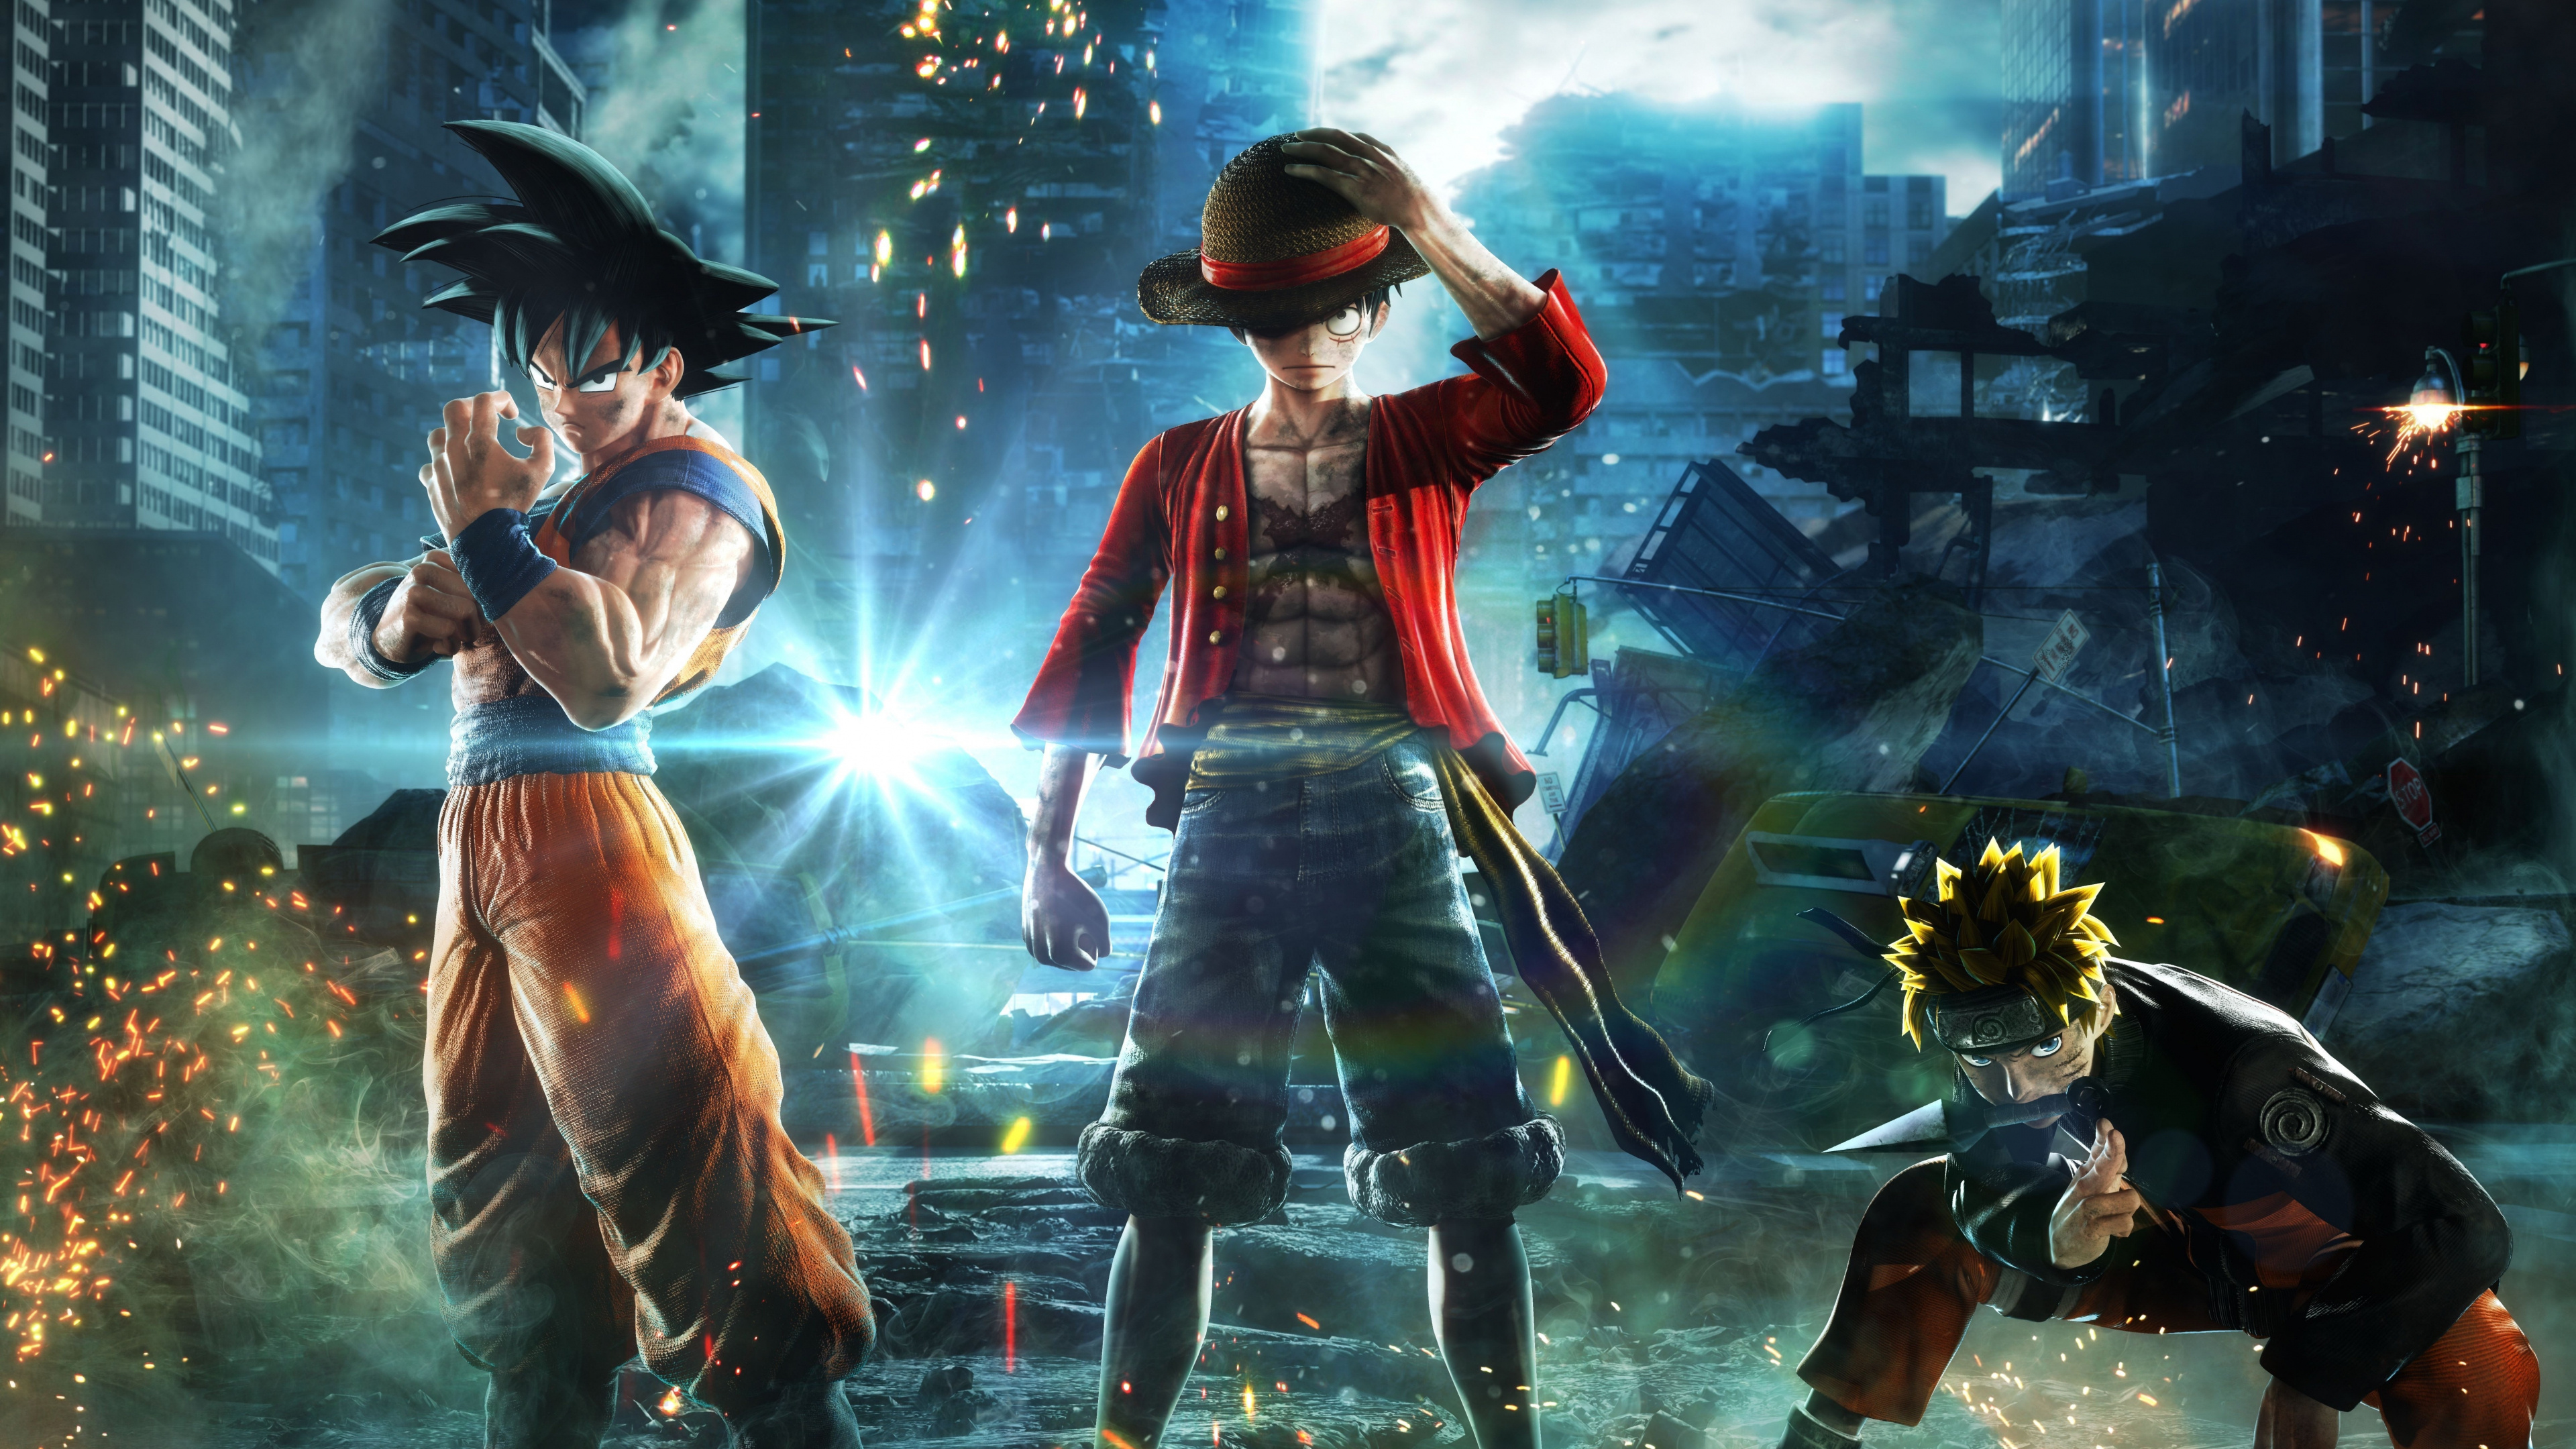 Jump Force wallpaper, Anime video game, Goku and Luffy, 4K game visuals, 3840x2160 4K Desktop